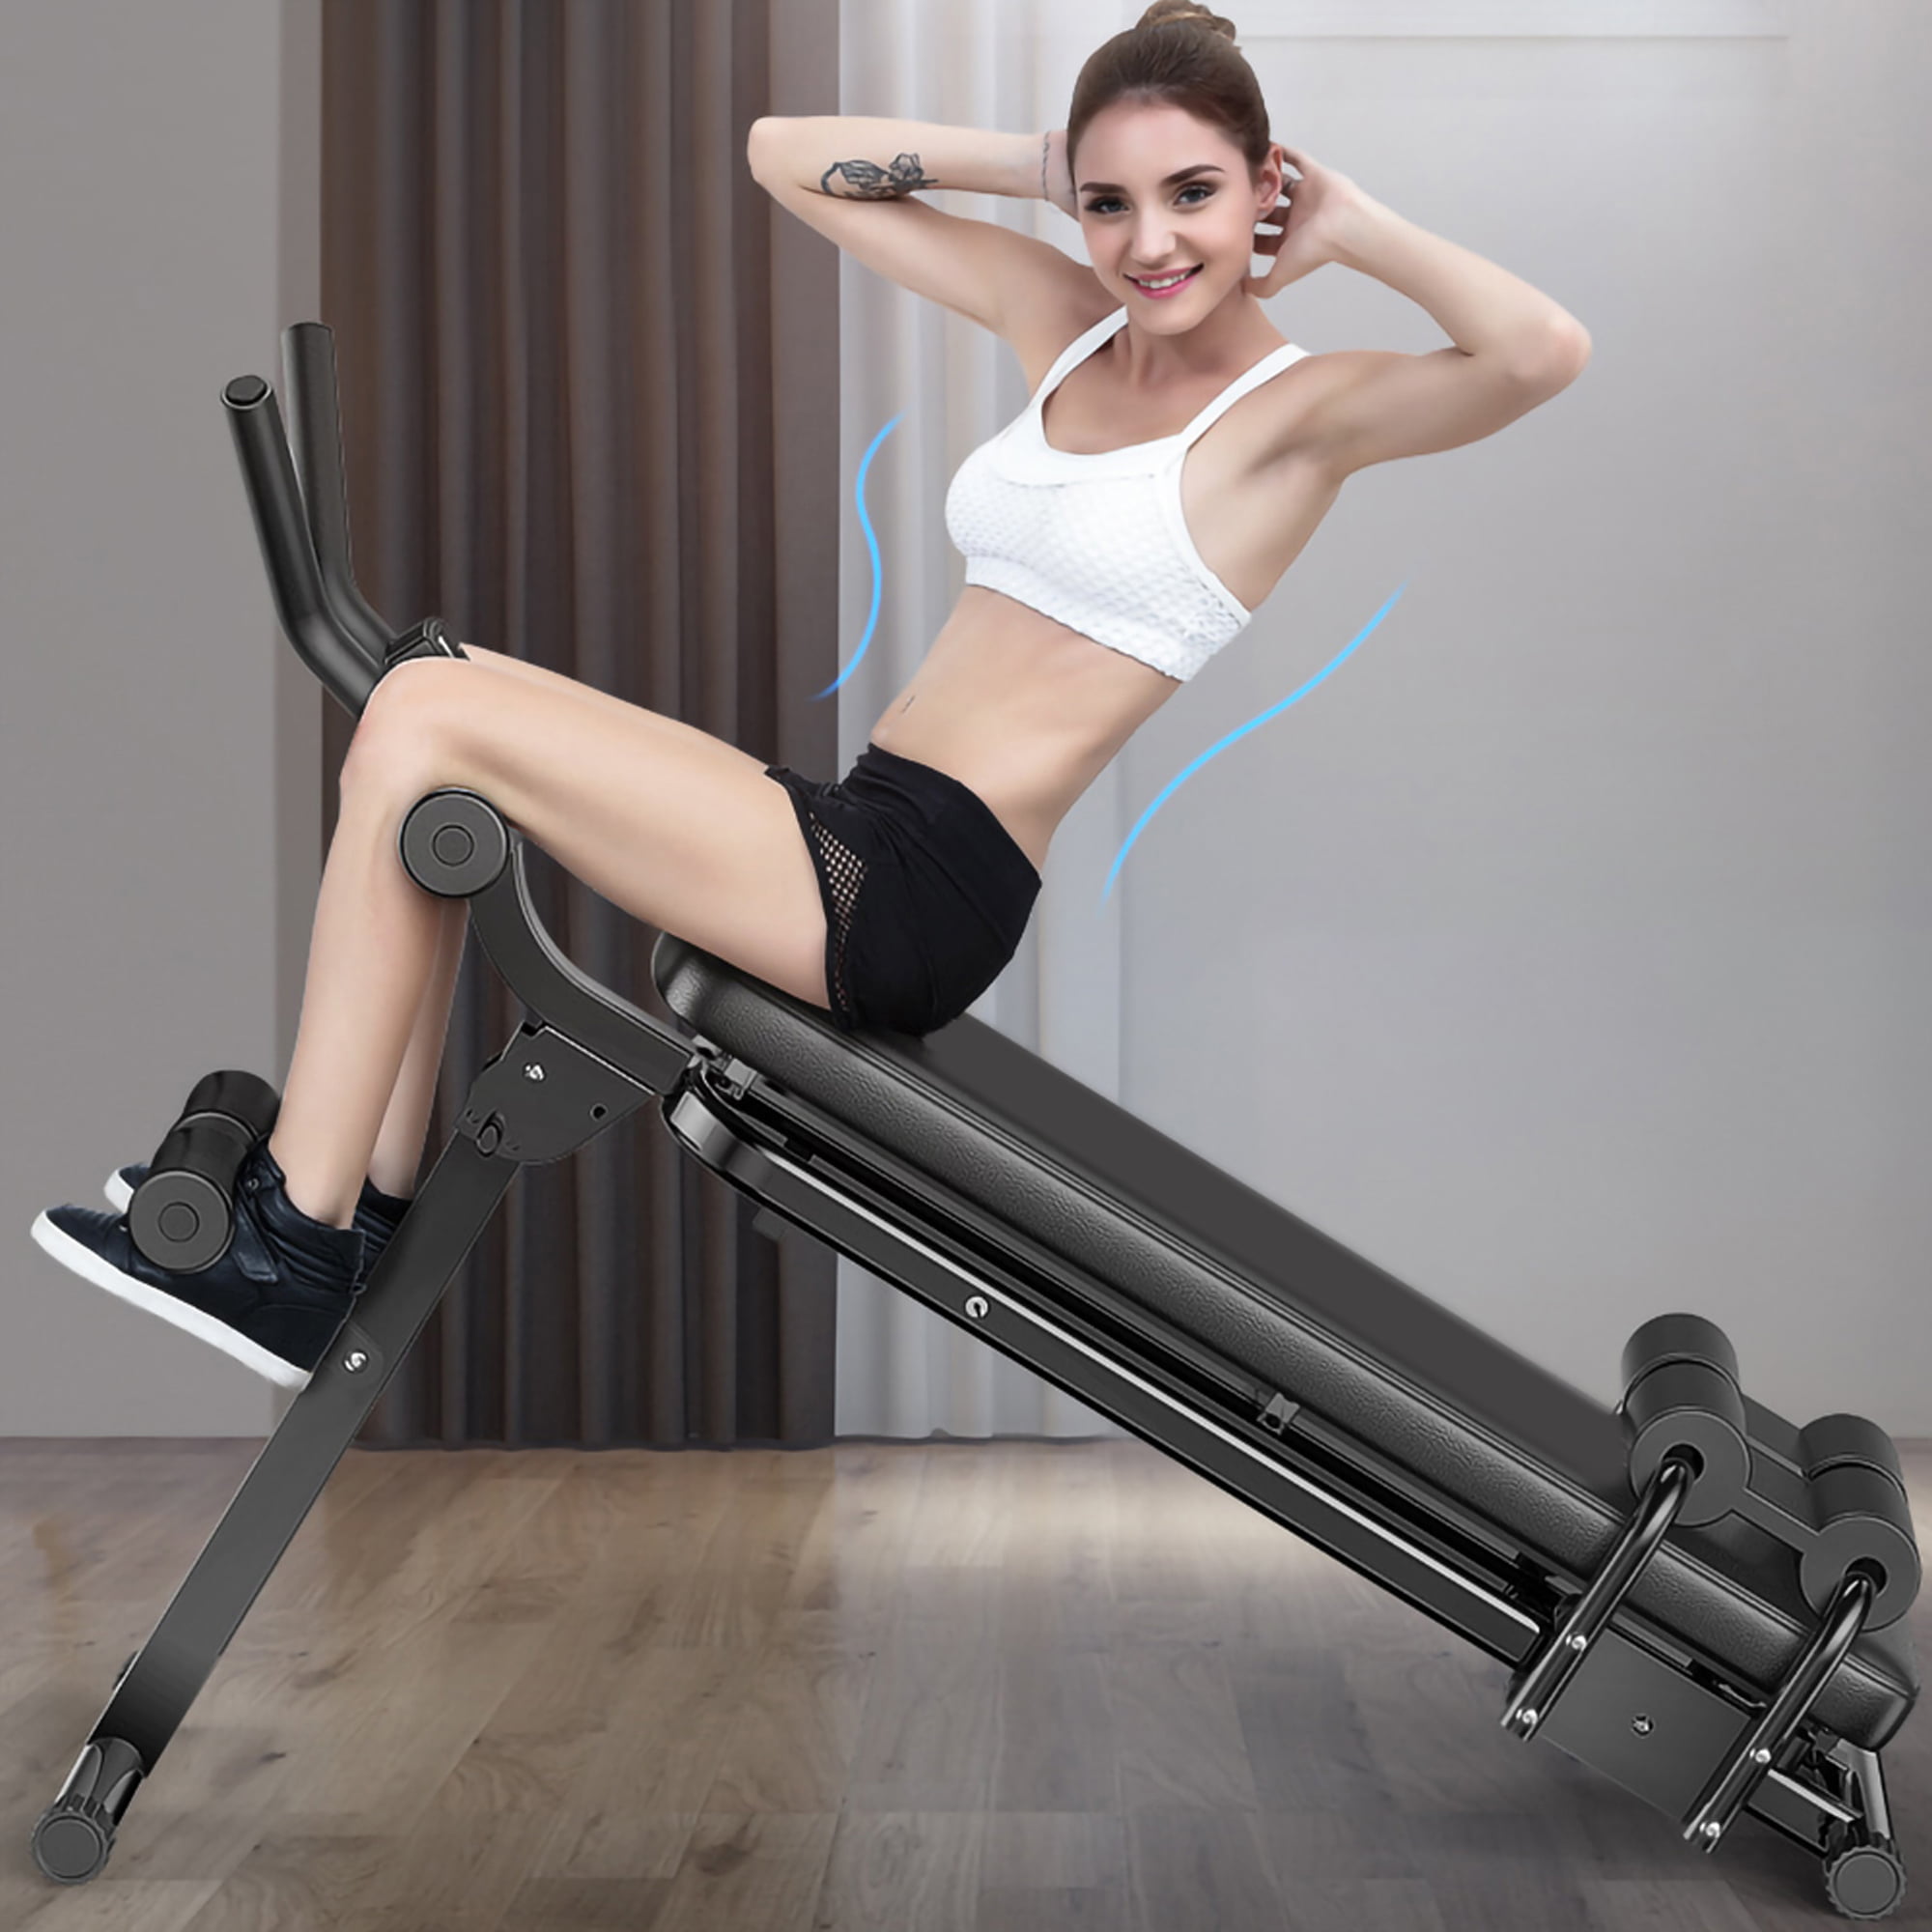 Details about   Sit Up Bench Decline Abdominal Fitness Home Gym AB Workout Exercise Equipment US 